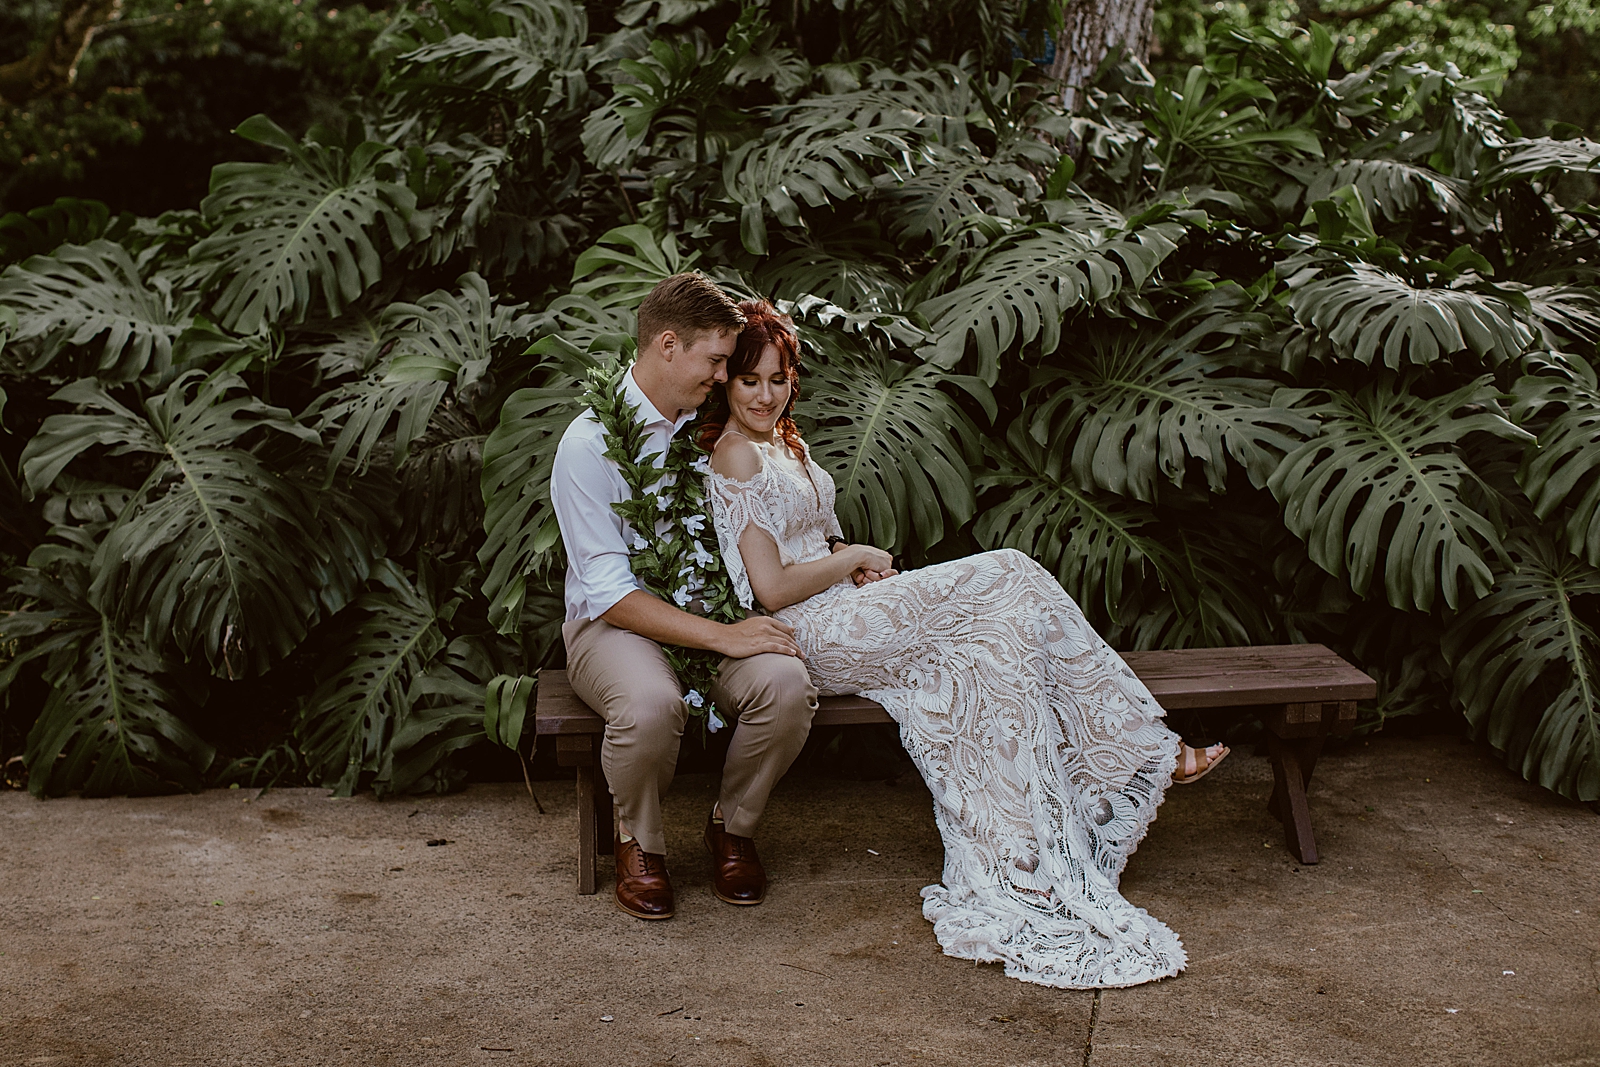 Groom sitting on bench with Bride leaning on him by green plants